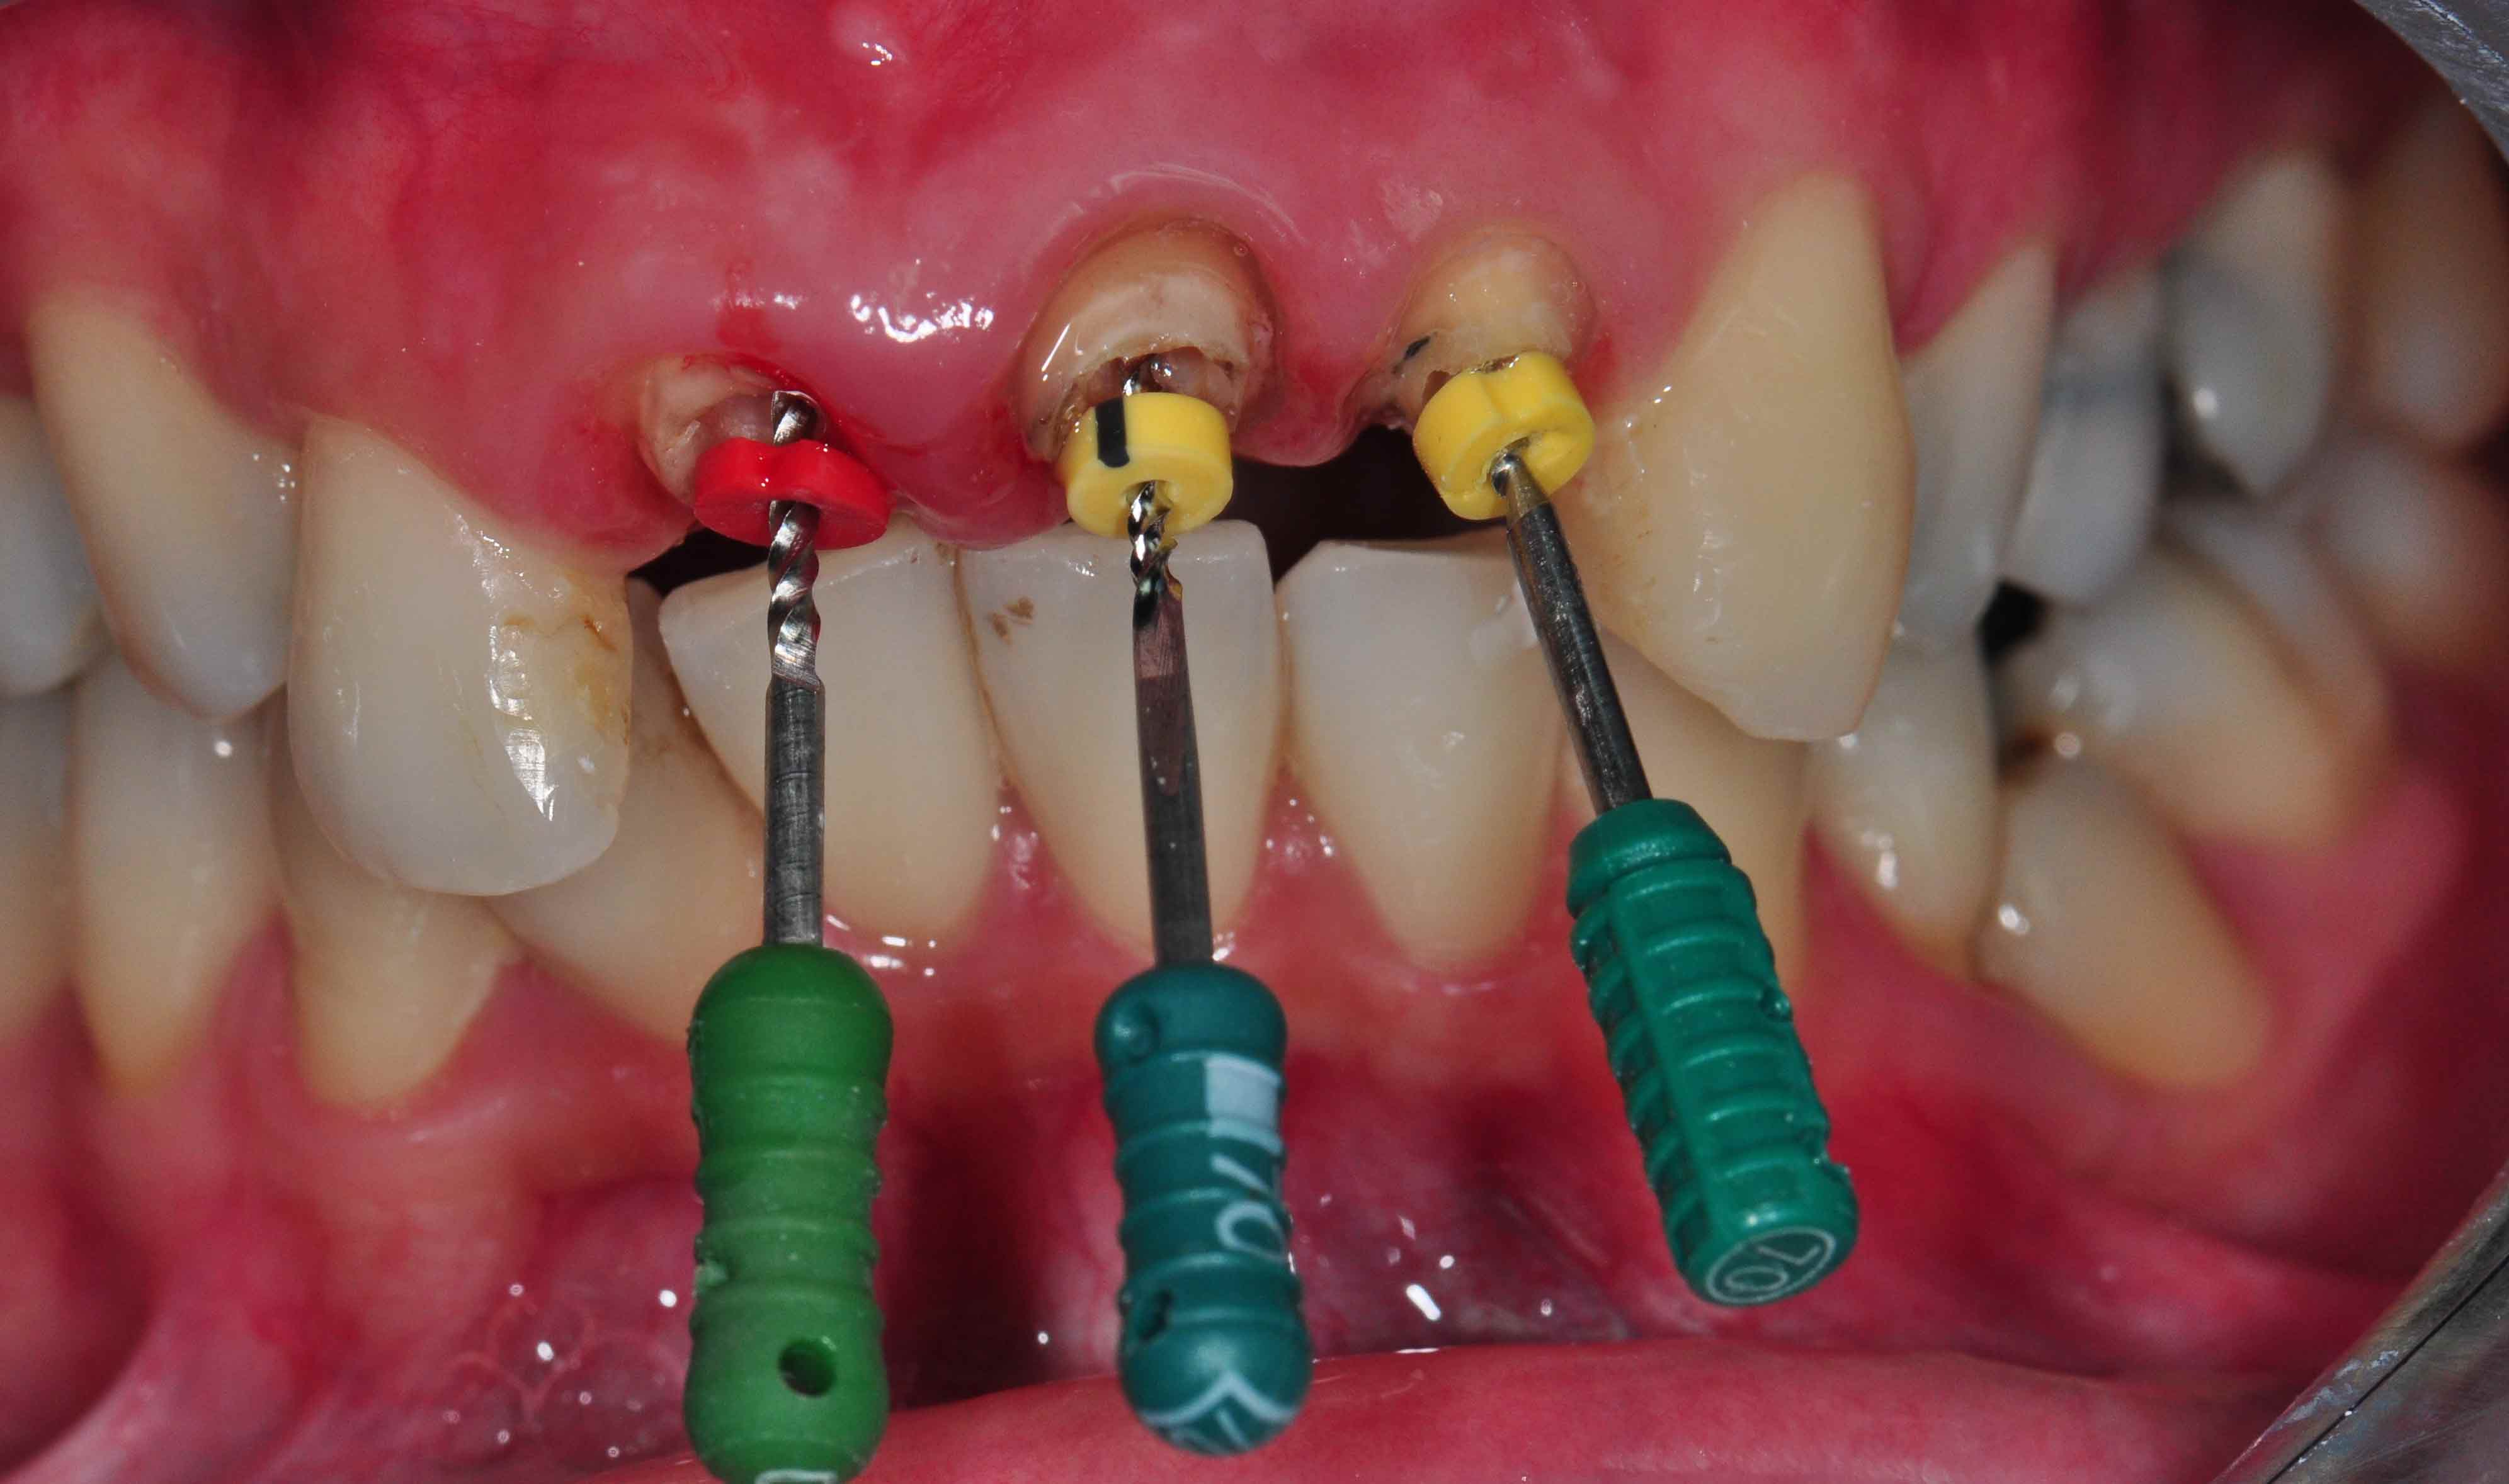 Front Tooth Root Canal